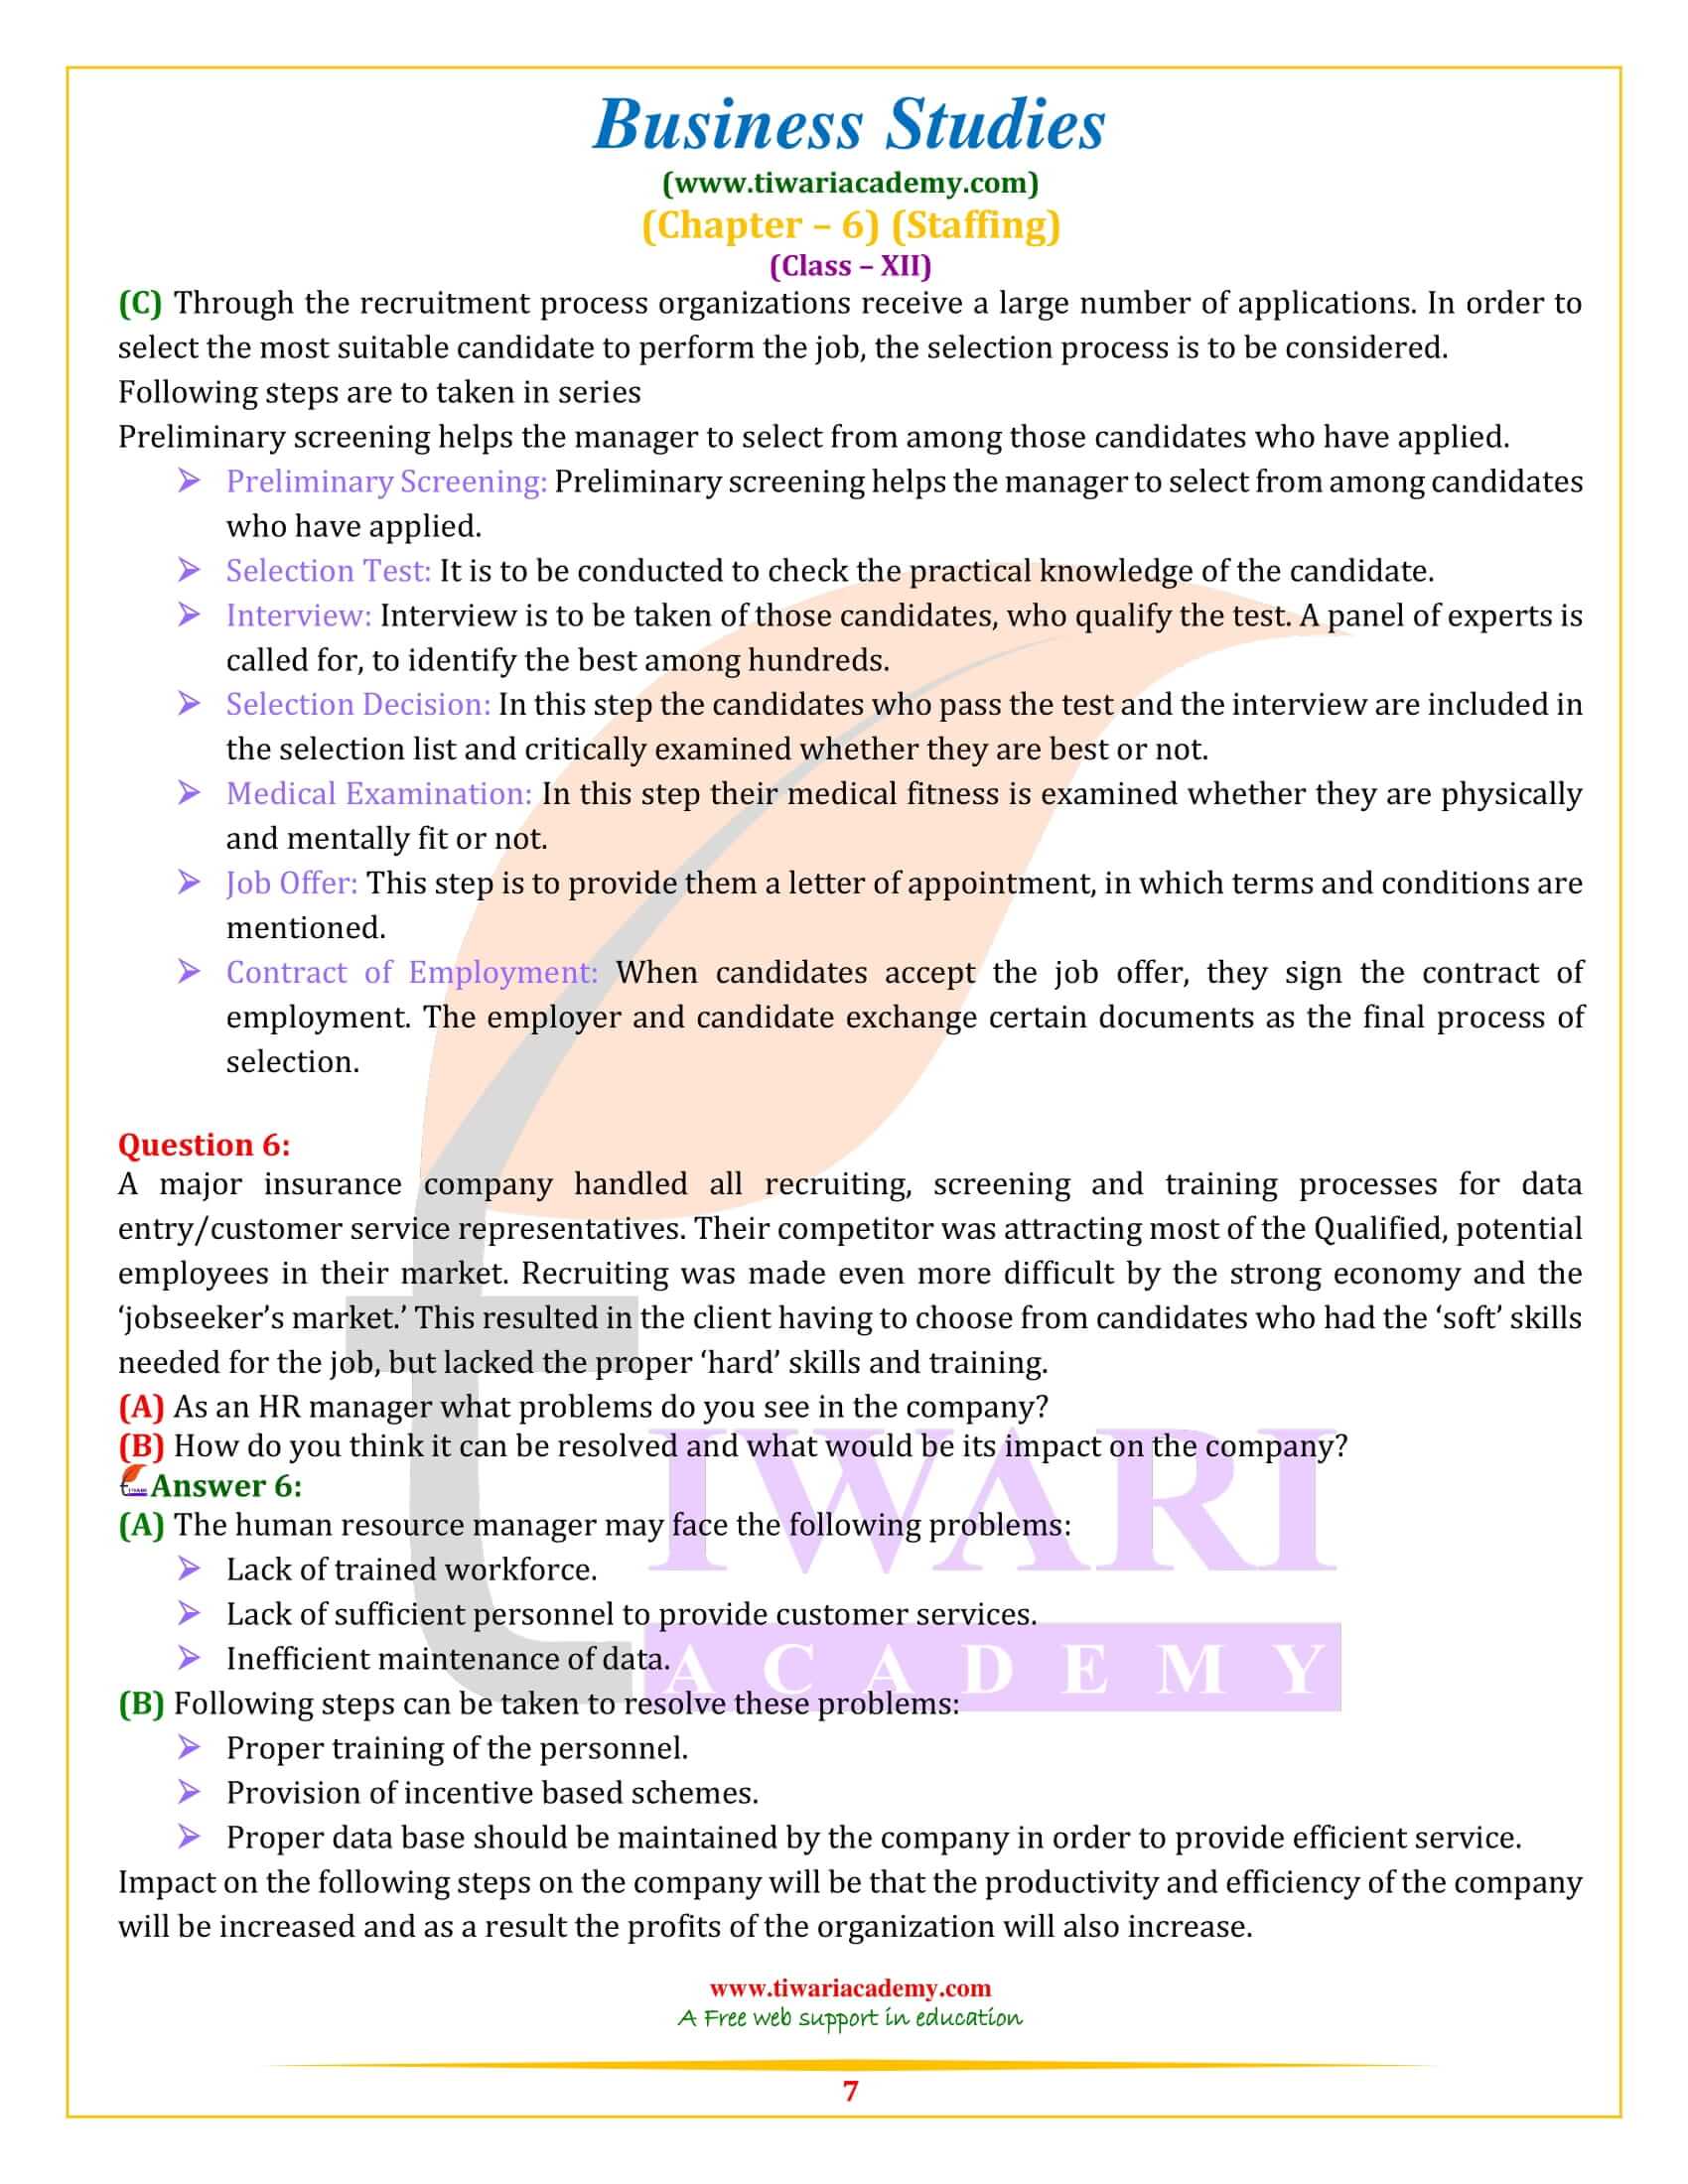 NCERT Solutions for Class 12 Business Studies Chapter 6 short answer type